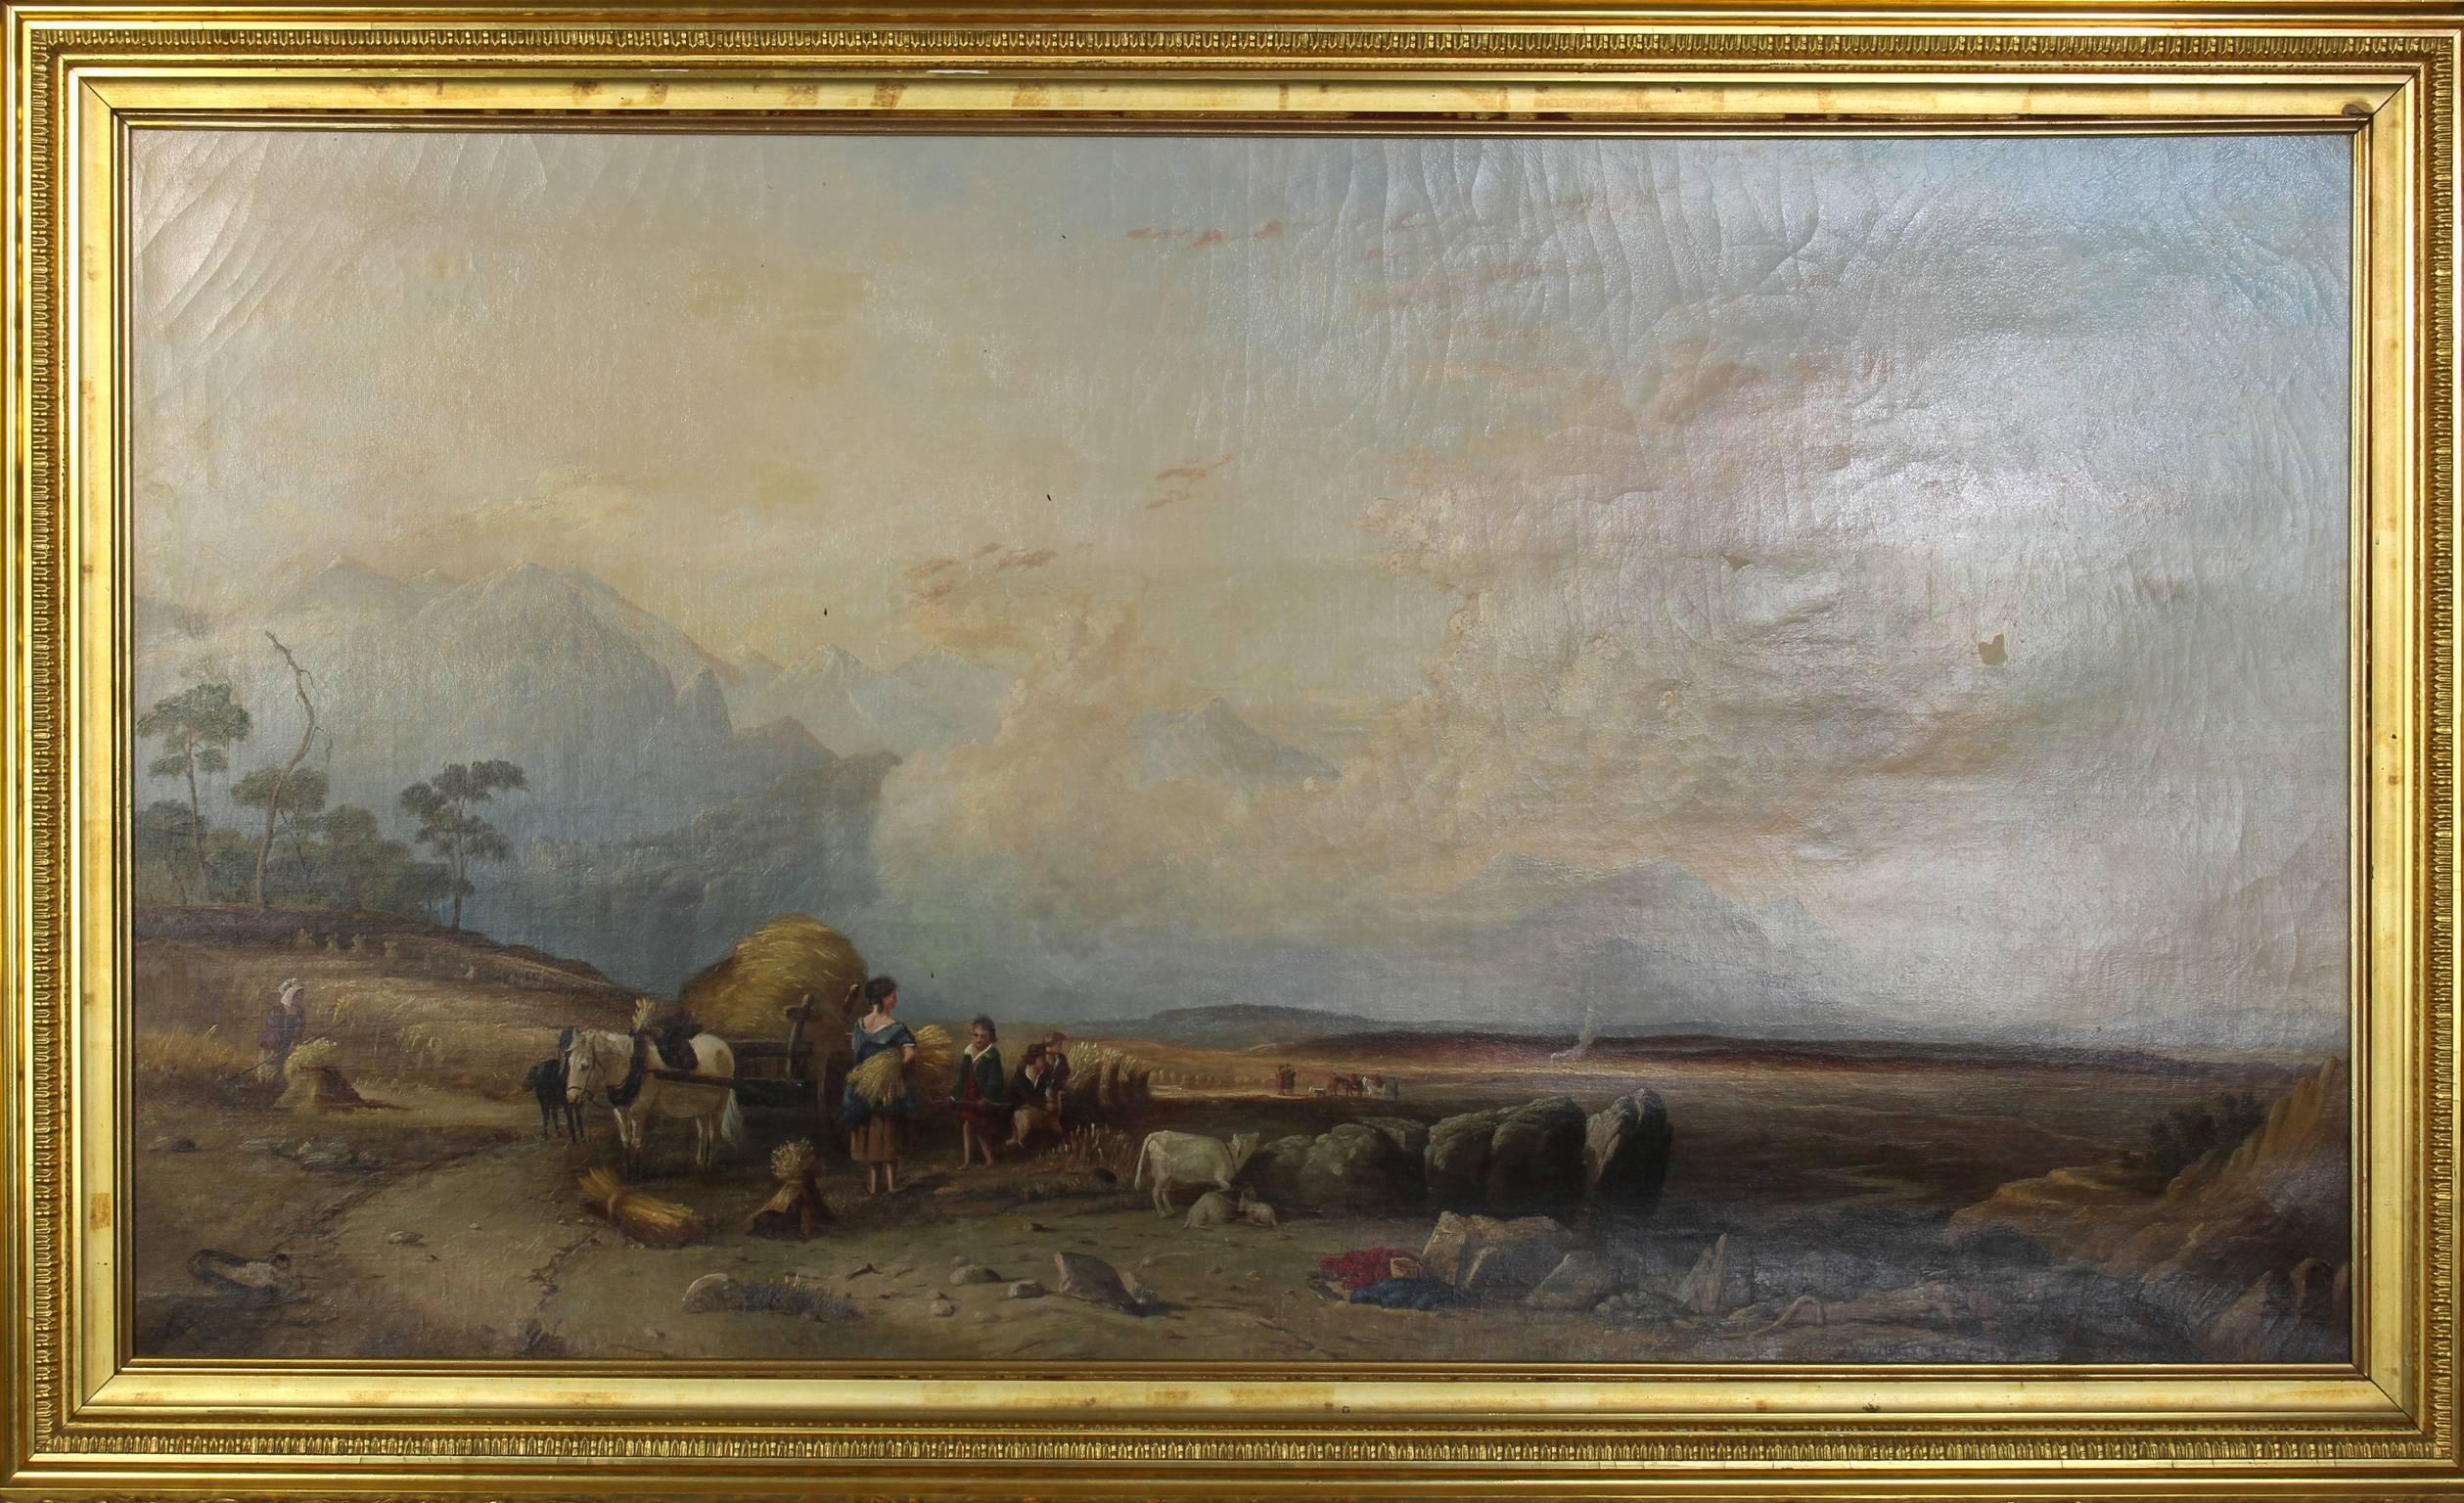 A large and impressive mid-19th century English oil on canvas painting of a hay scene in a romantic setting by William Shayer (1789-1879) in its original elaborate giltwood frame.